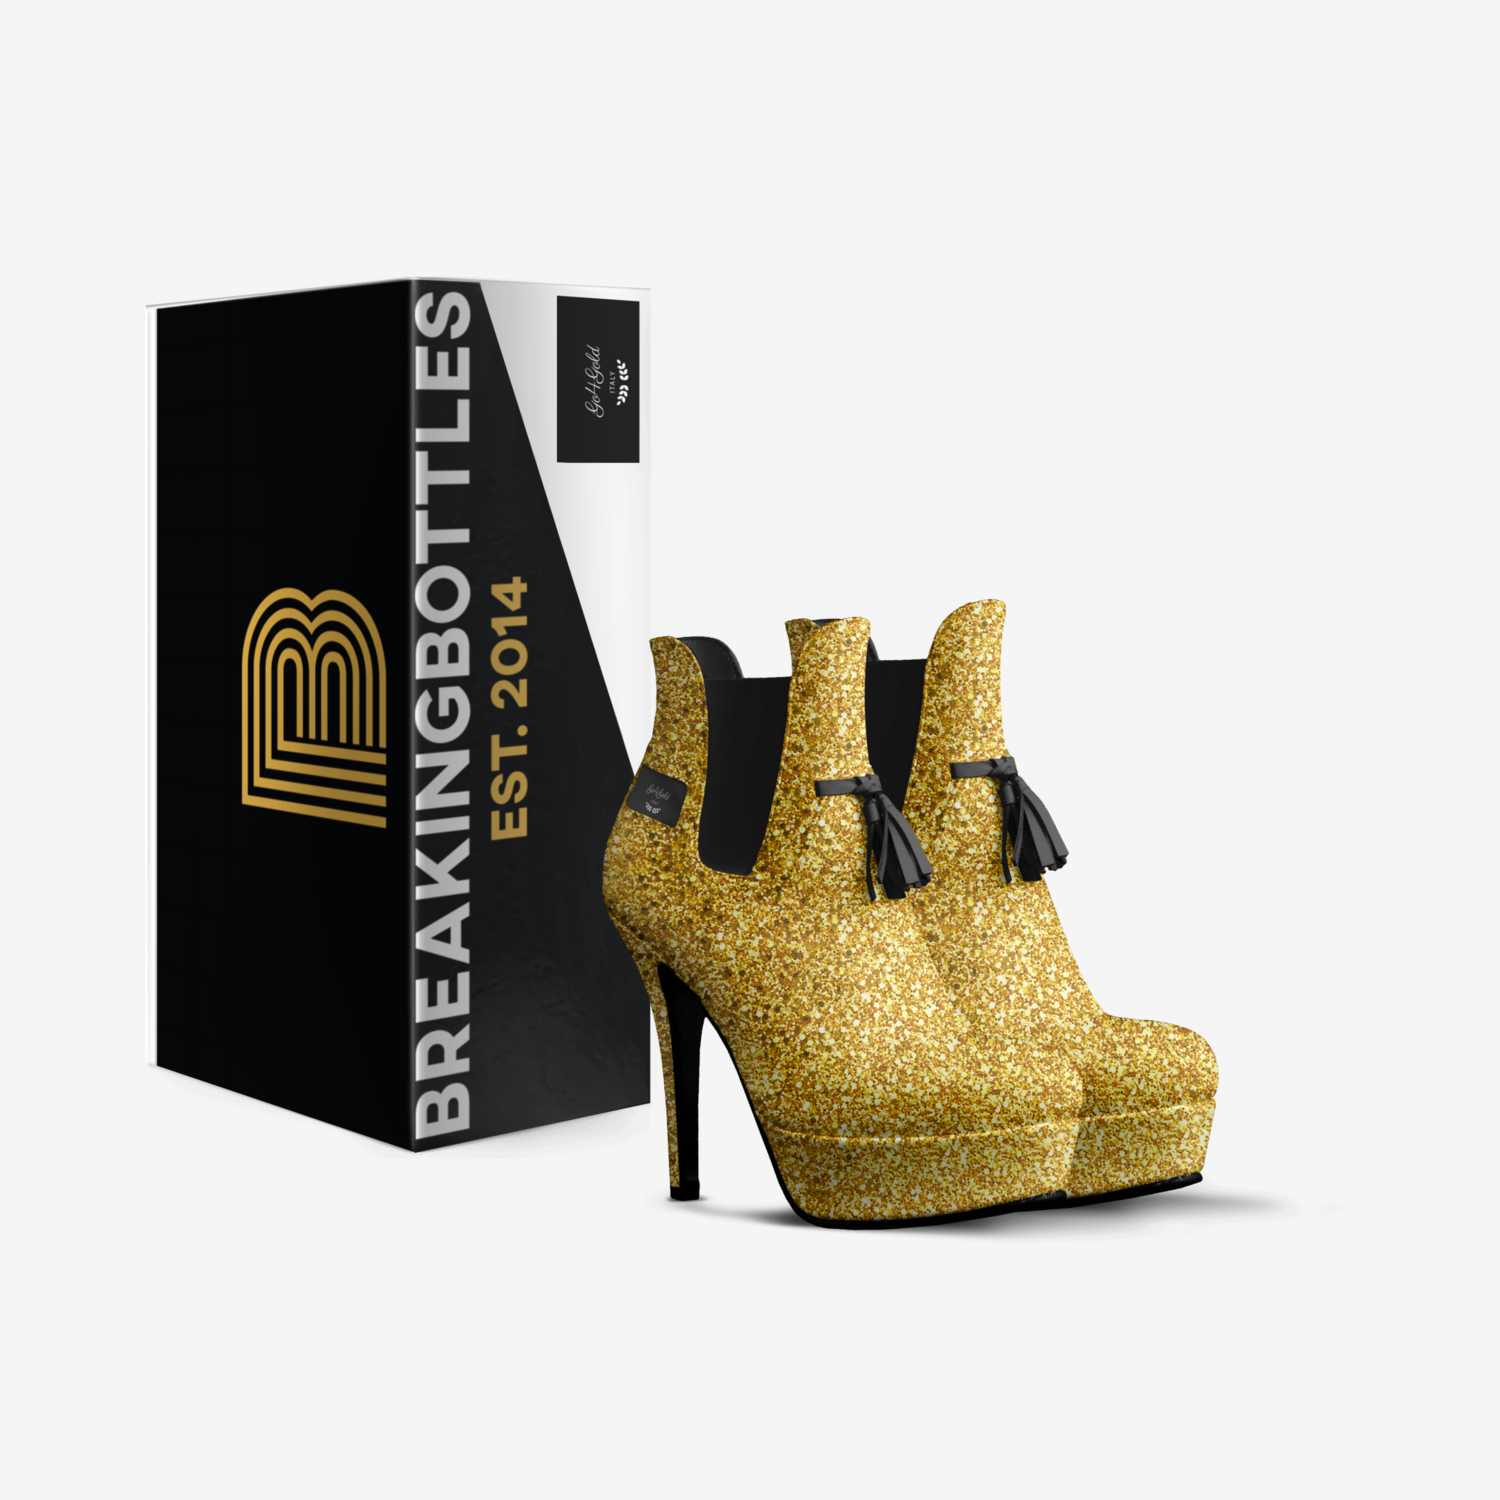 Go4Gold custom made in Italy shoes by Nicole Pascale | Box view